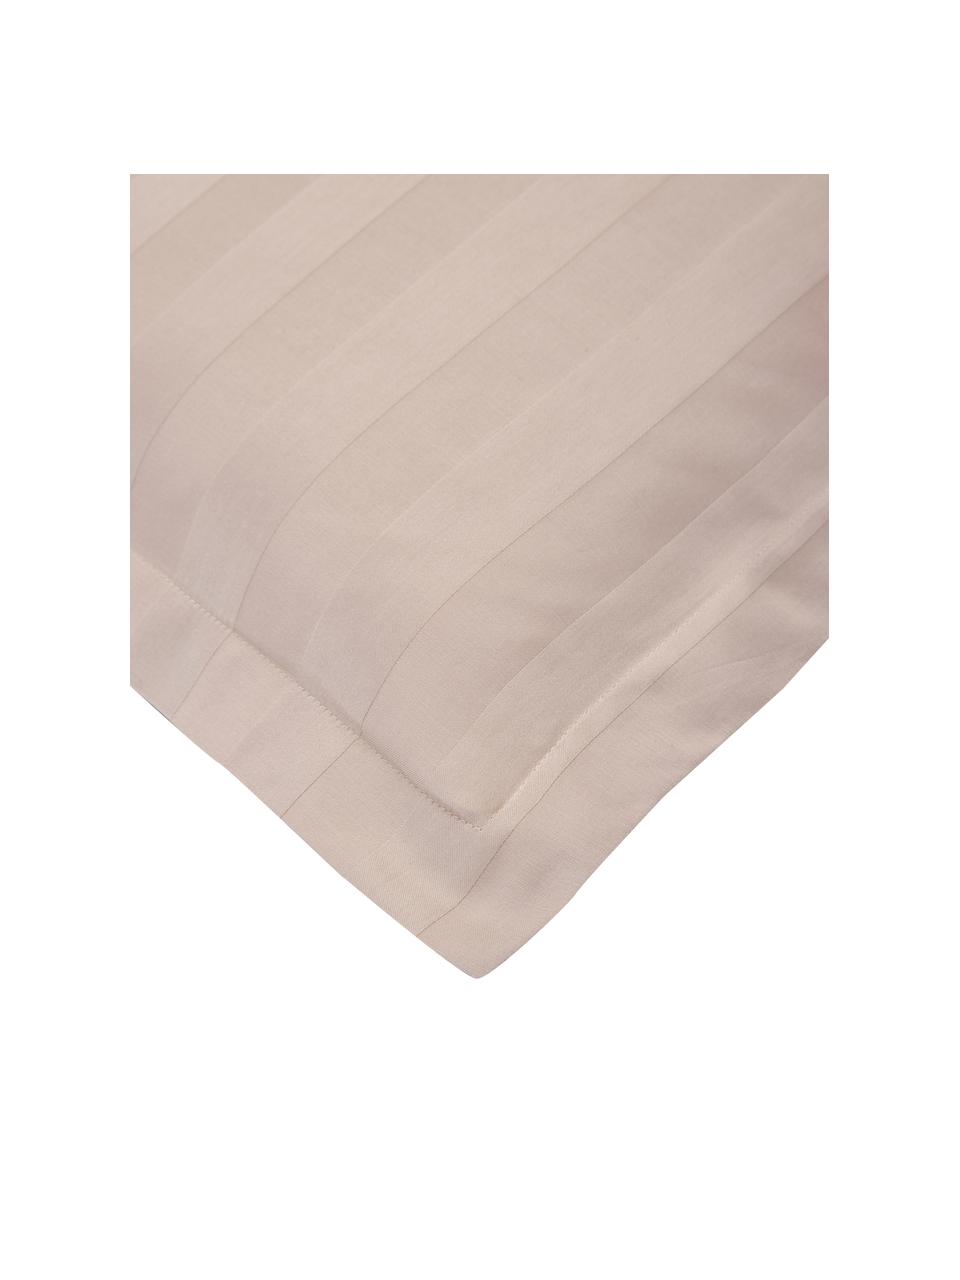 Housse de couette satin taupe Willa, Taupe, larg. 140 x long. 200 cm